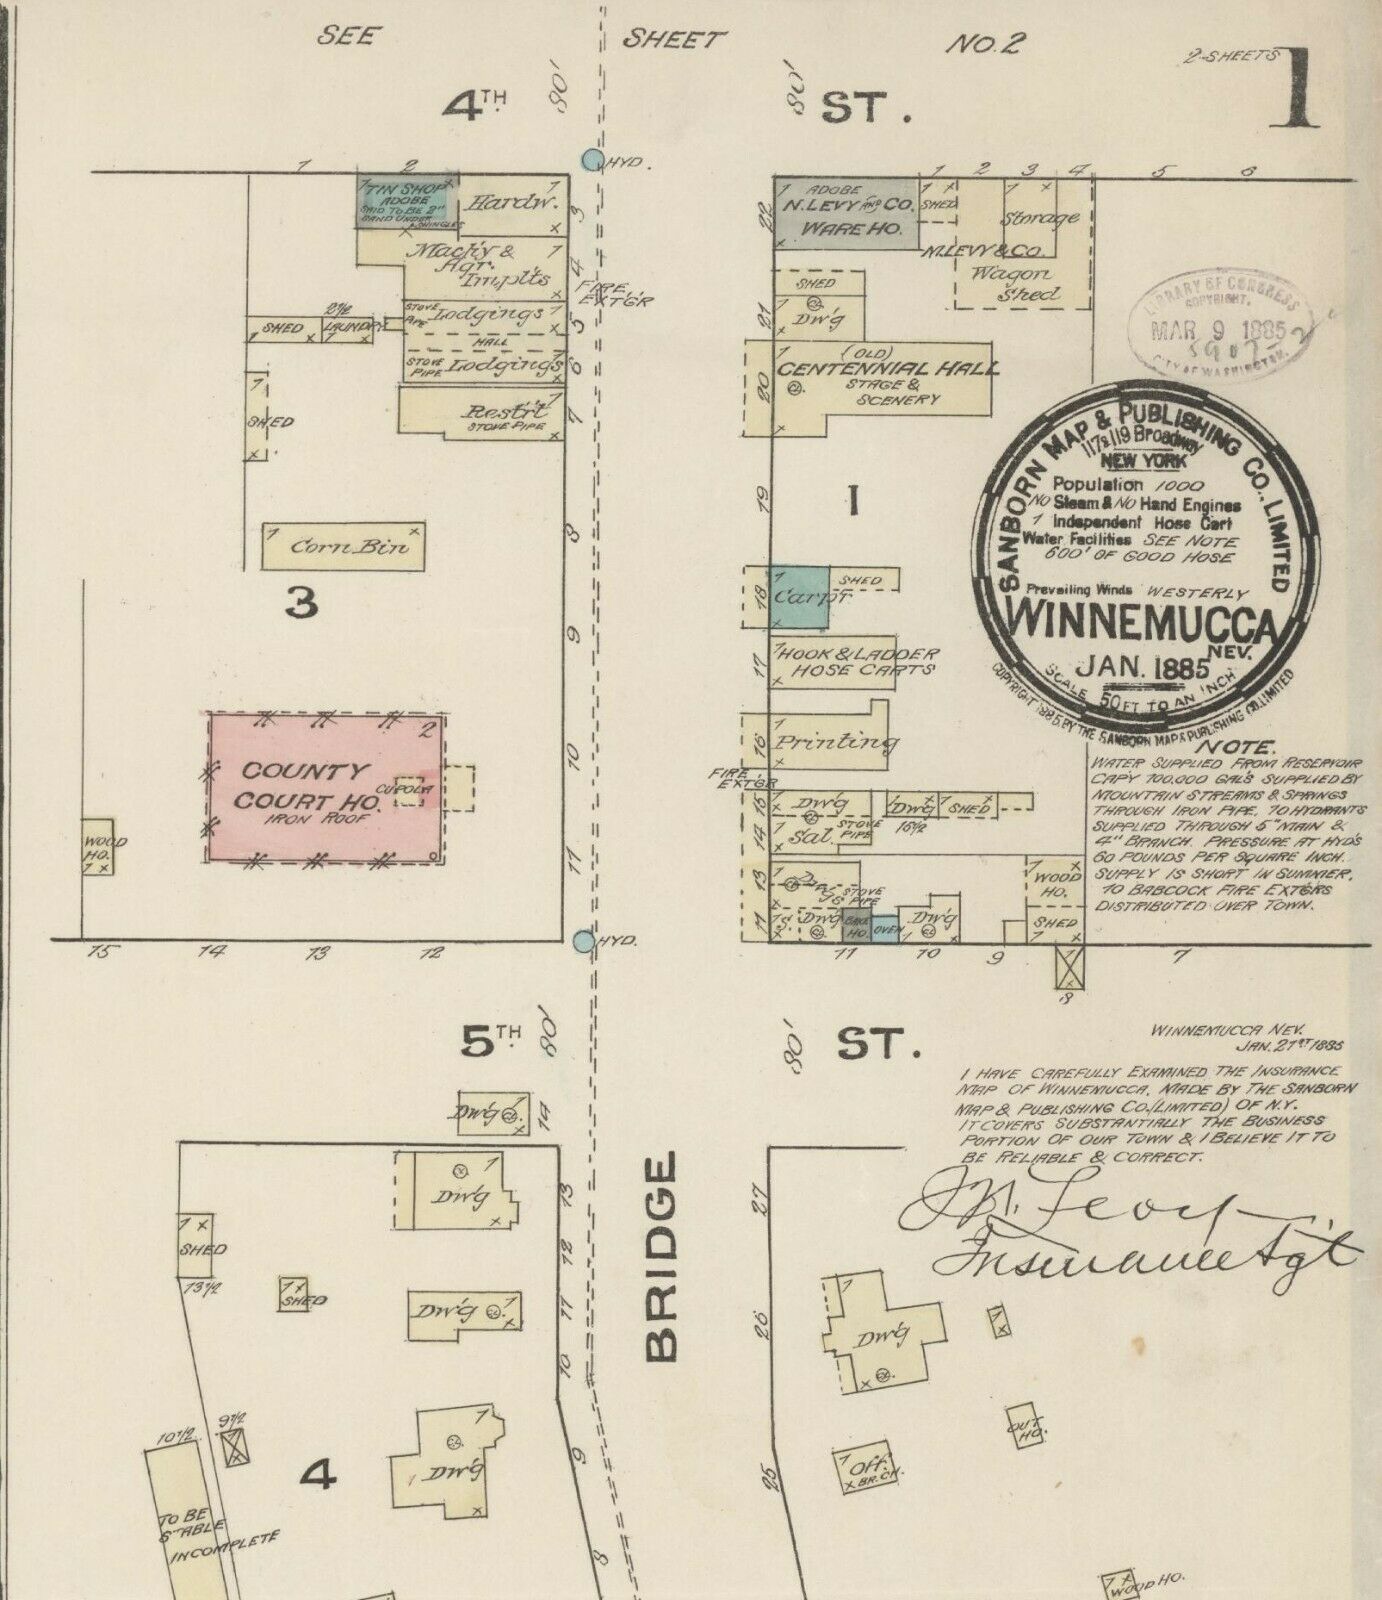 Winnemucca, Nevada Sanborn Map© Sheets~34 Maps Made In 1885 To 1943 In Color